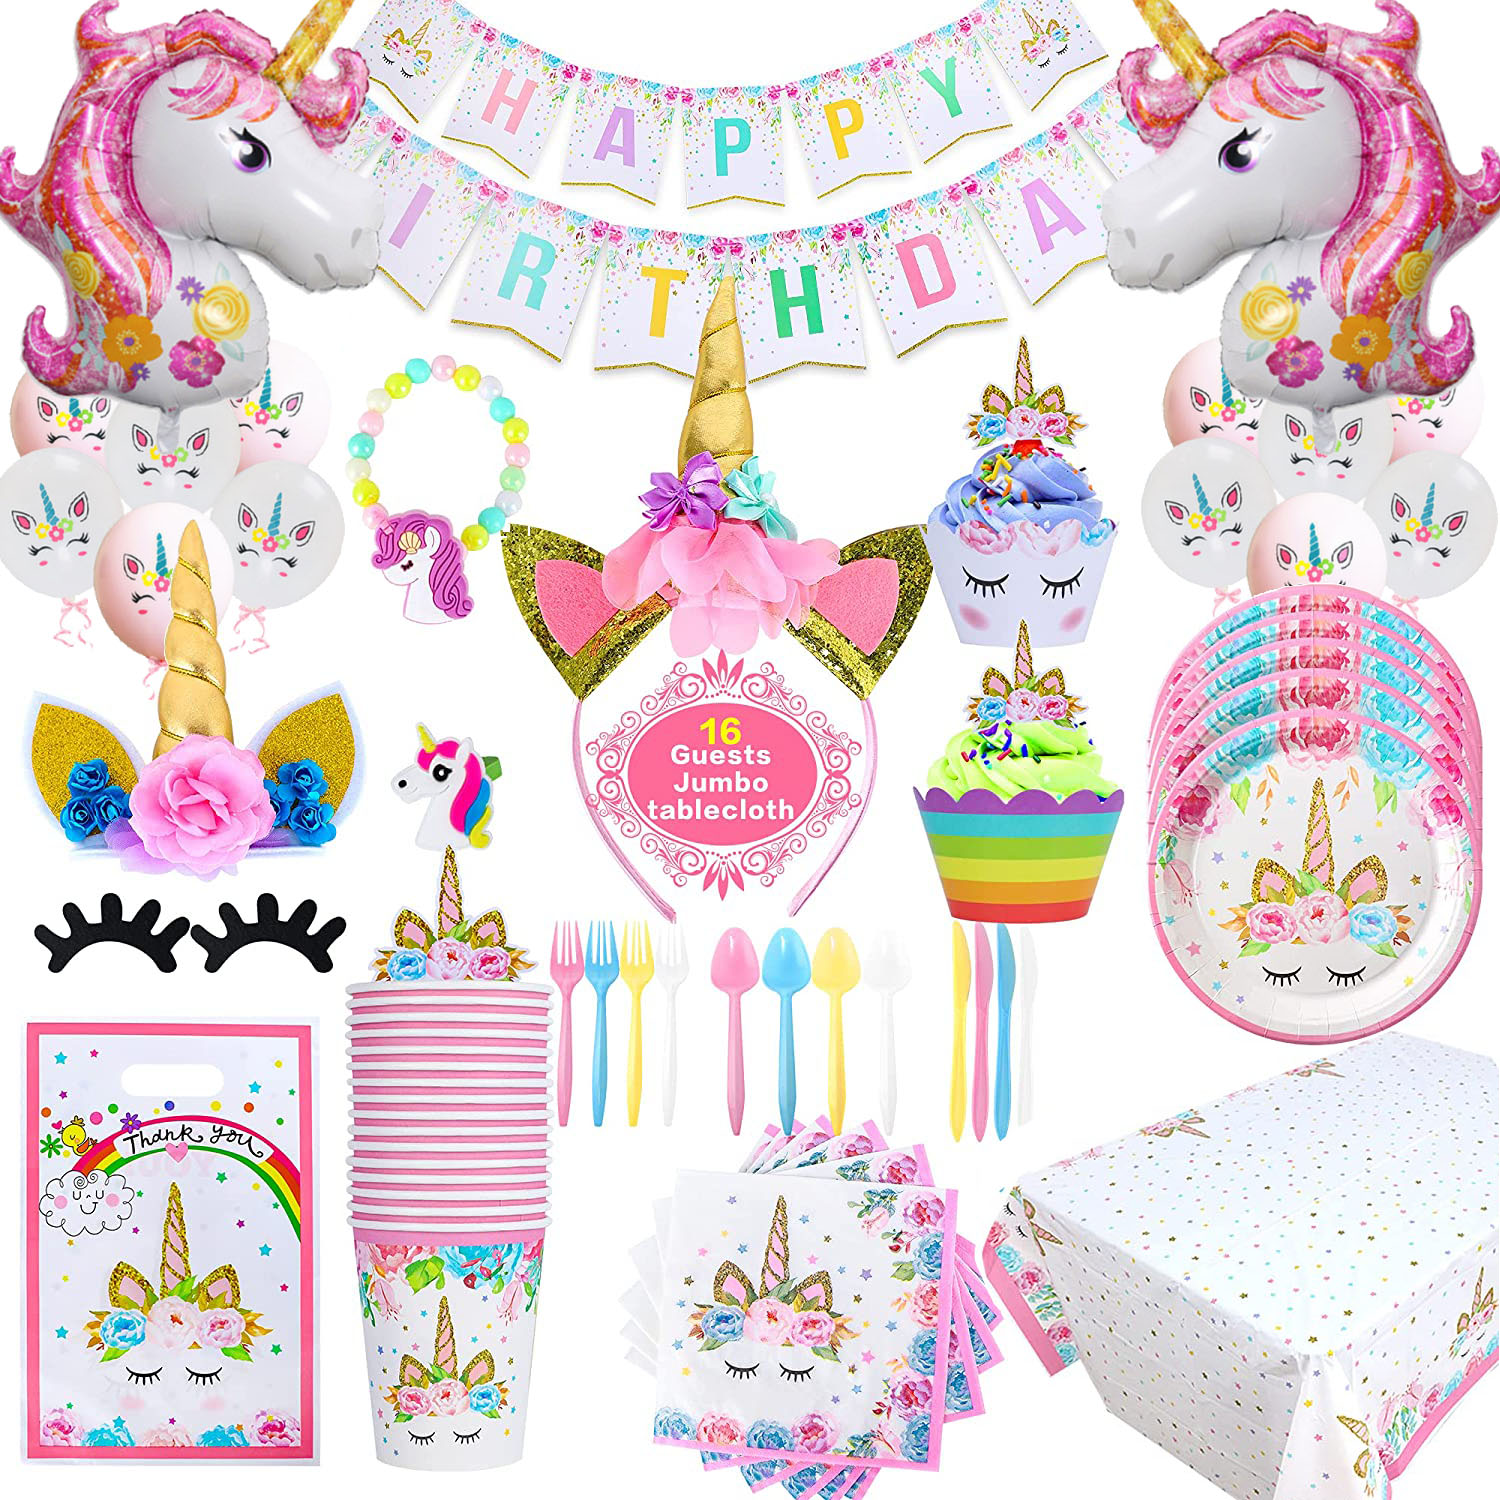 Unicorn Party Supplies and Plates for Girls Birthday - Unicorn Birthday Party Decorations Set with Goodie bags,Unicorn Ring,Unicorn Bracelet, XL Table Cloth for Creating Amazing Unicorn Theme Party - image 1 of 7